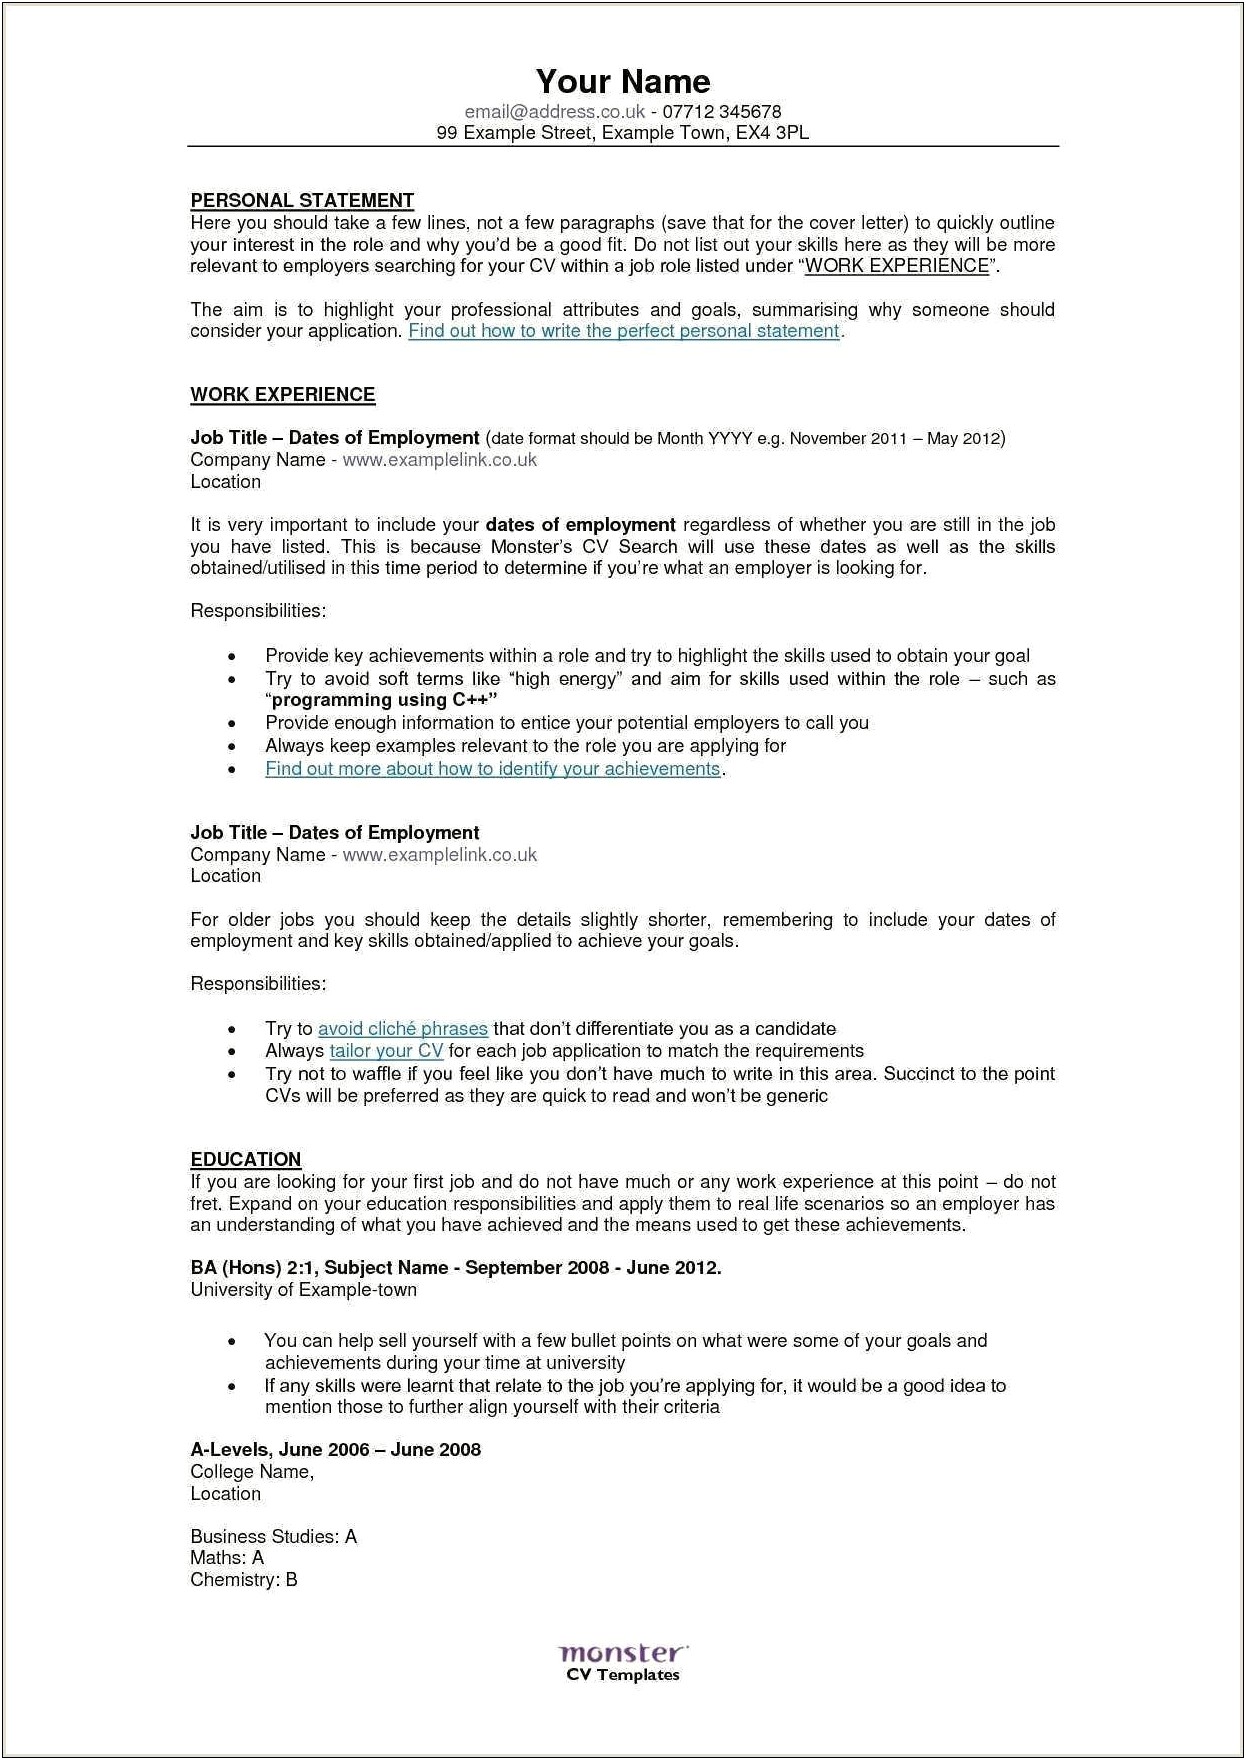 Resumes Based On Experience Not Dated